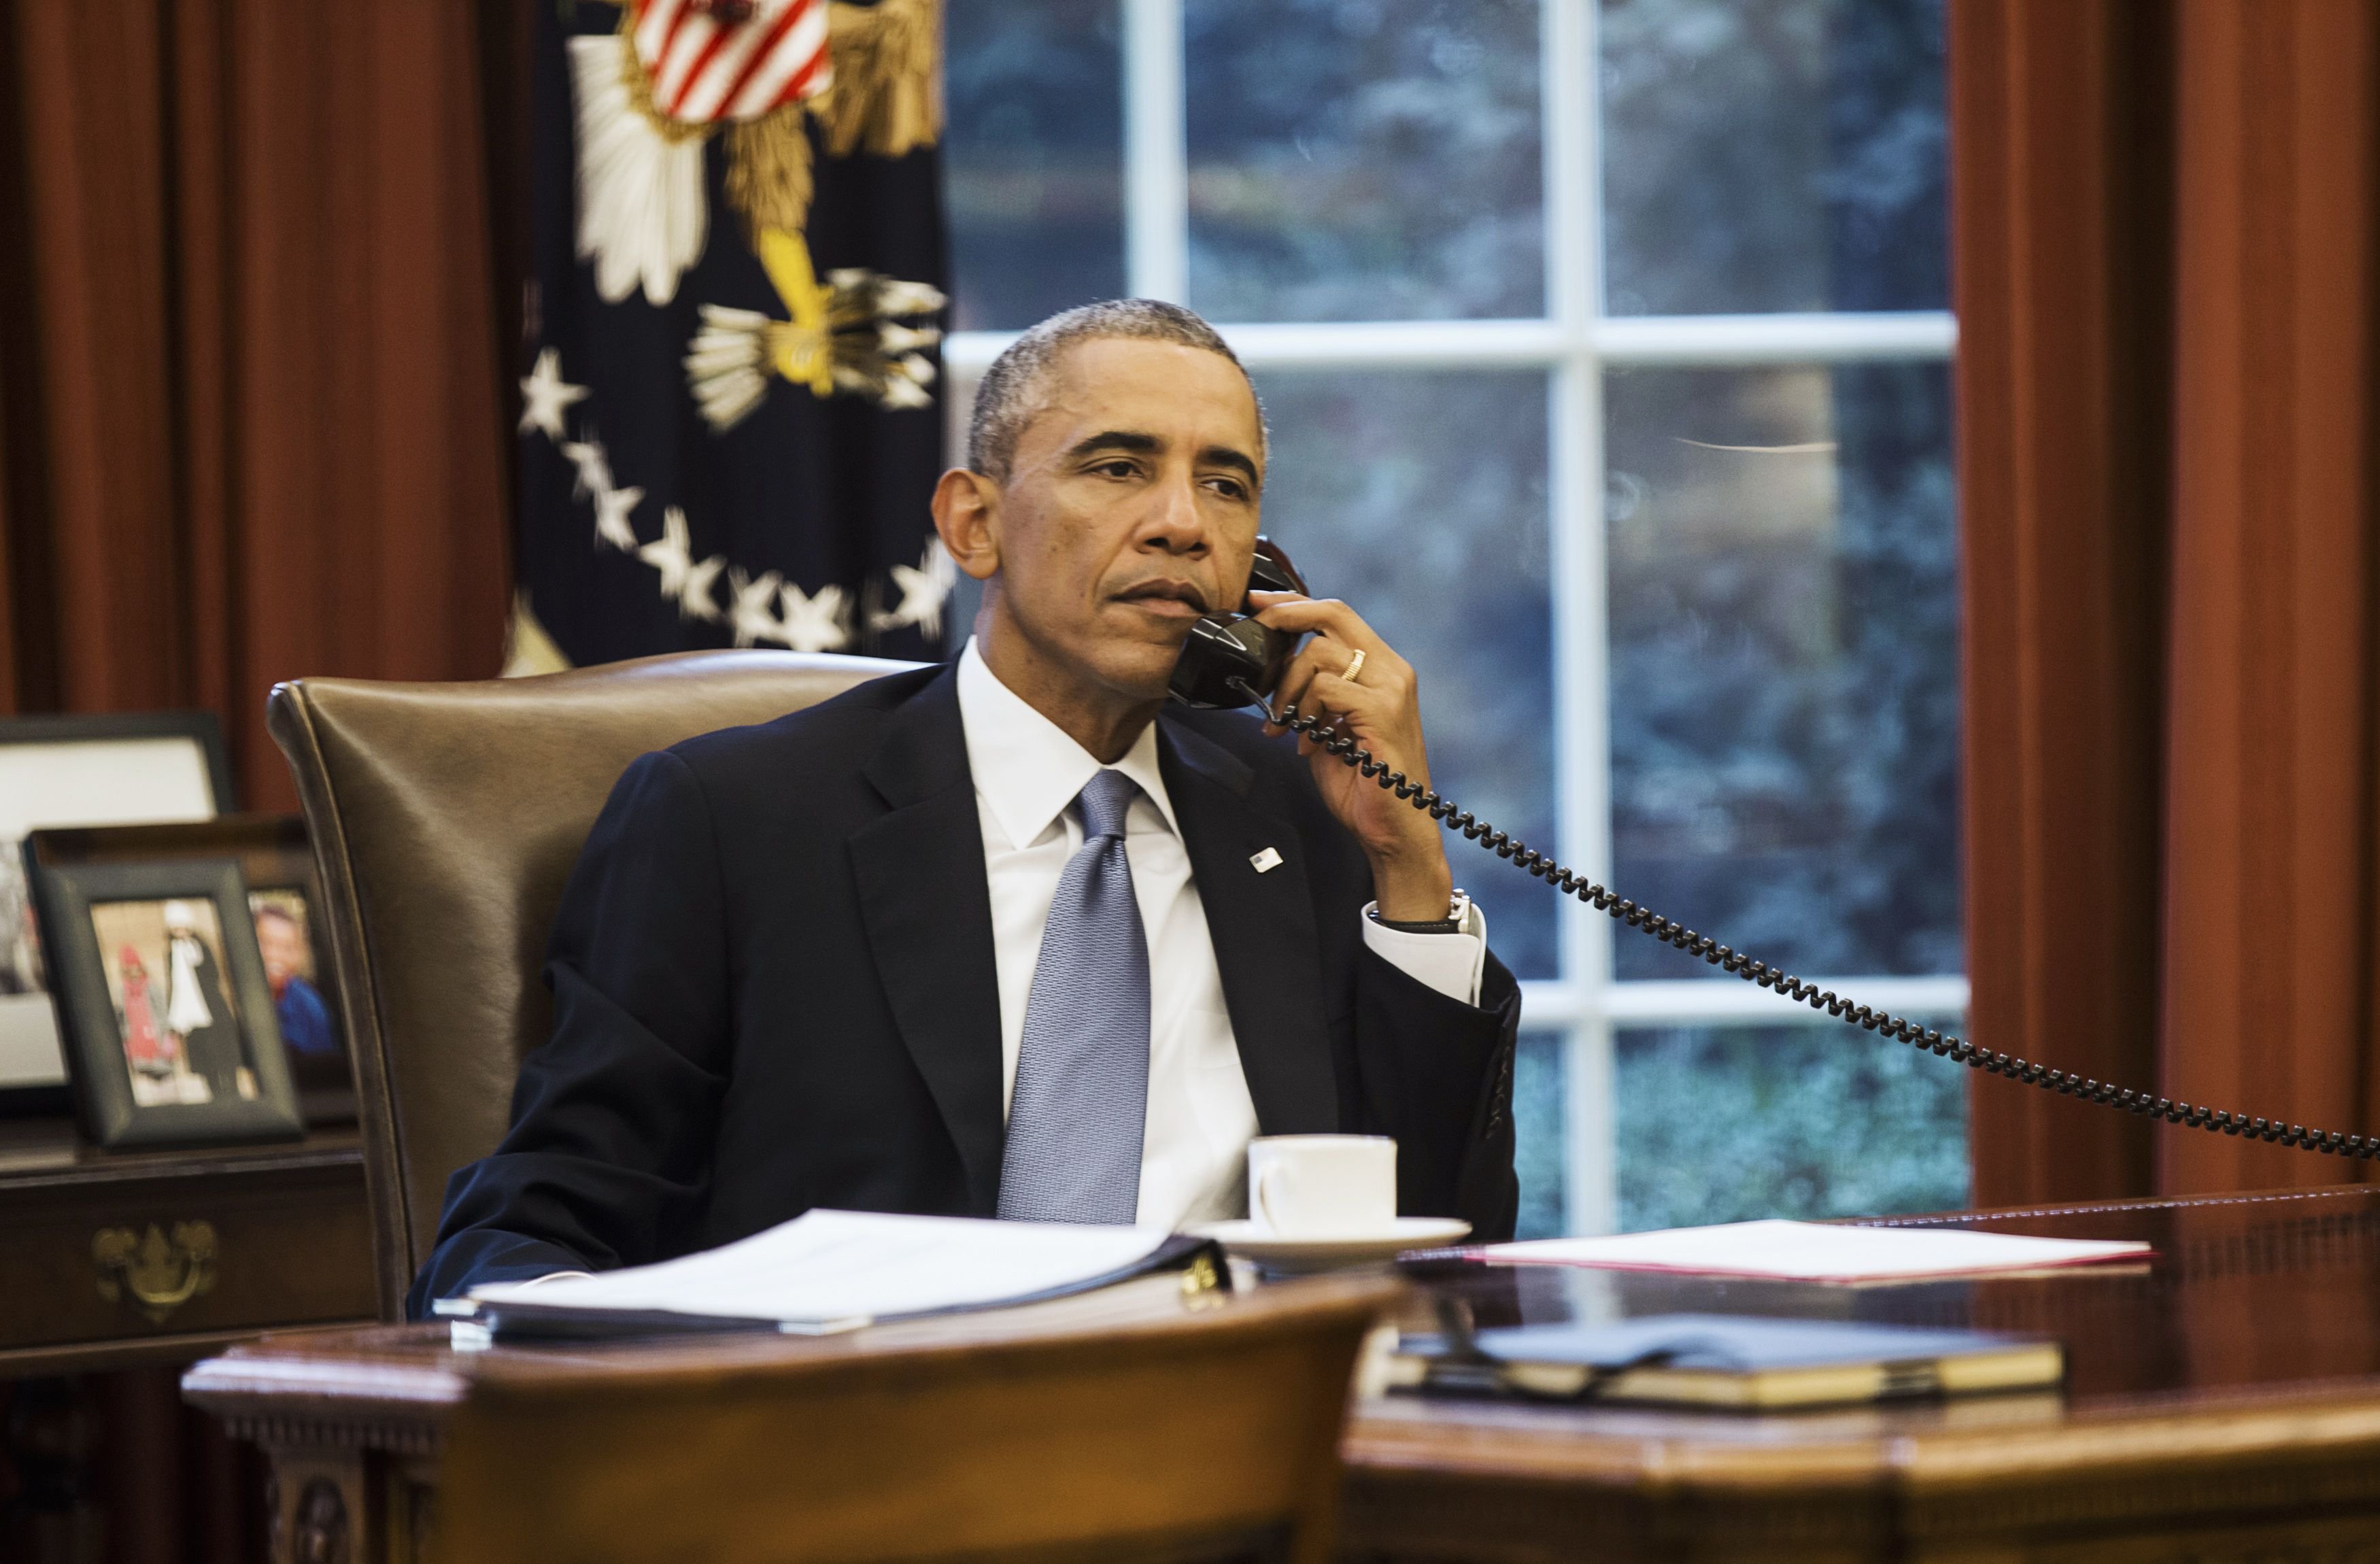 U.S. President Barack Obama speaks on the phone with Saudi Arabia's King Abdullah, before giving a speech to the nation regarding the fight against ISIS, from the Oval Office of the White House, in Washington on Sept. 10, 2014. (Kevin Lamarque—Reuters)